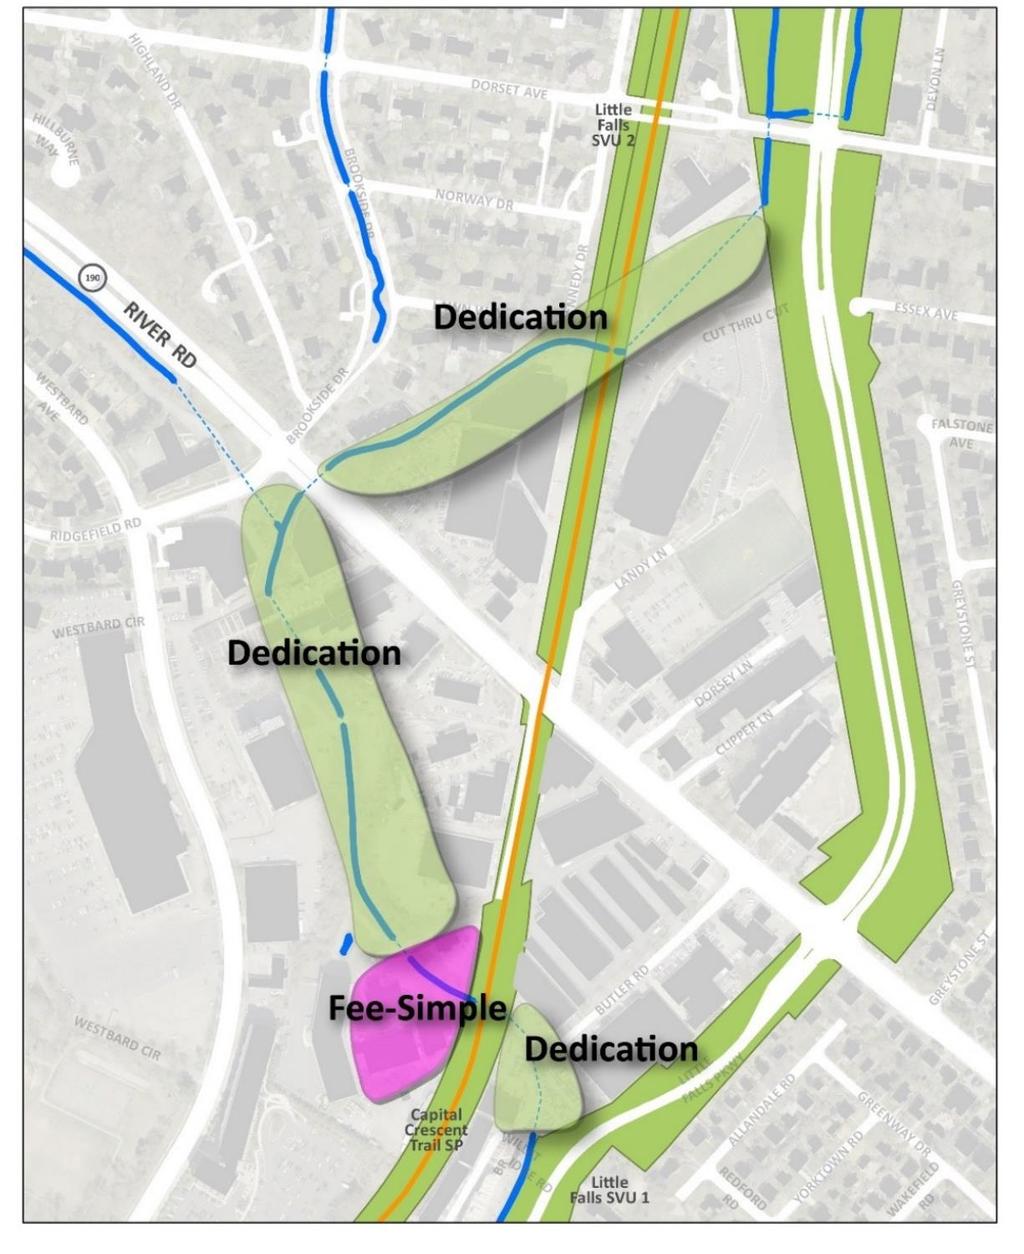 Willett Branch Greenway Property Acquisition Strategy Primary strategy: Dedication